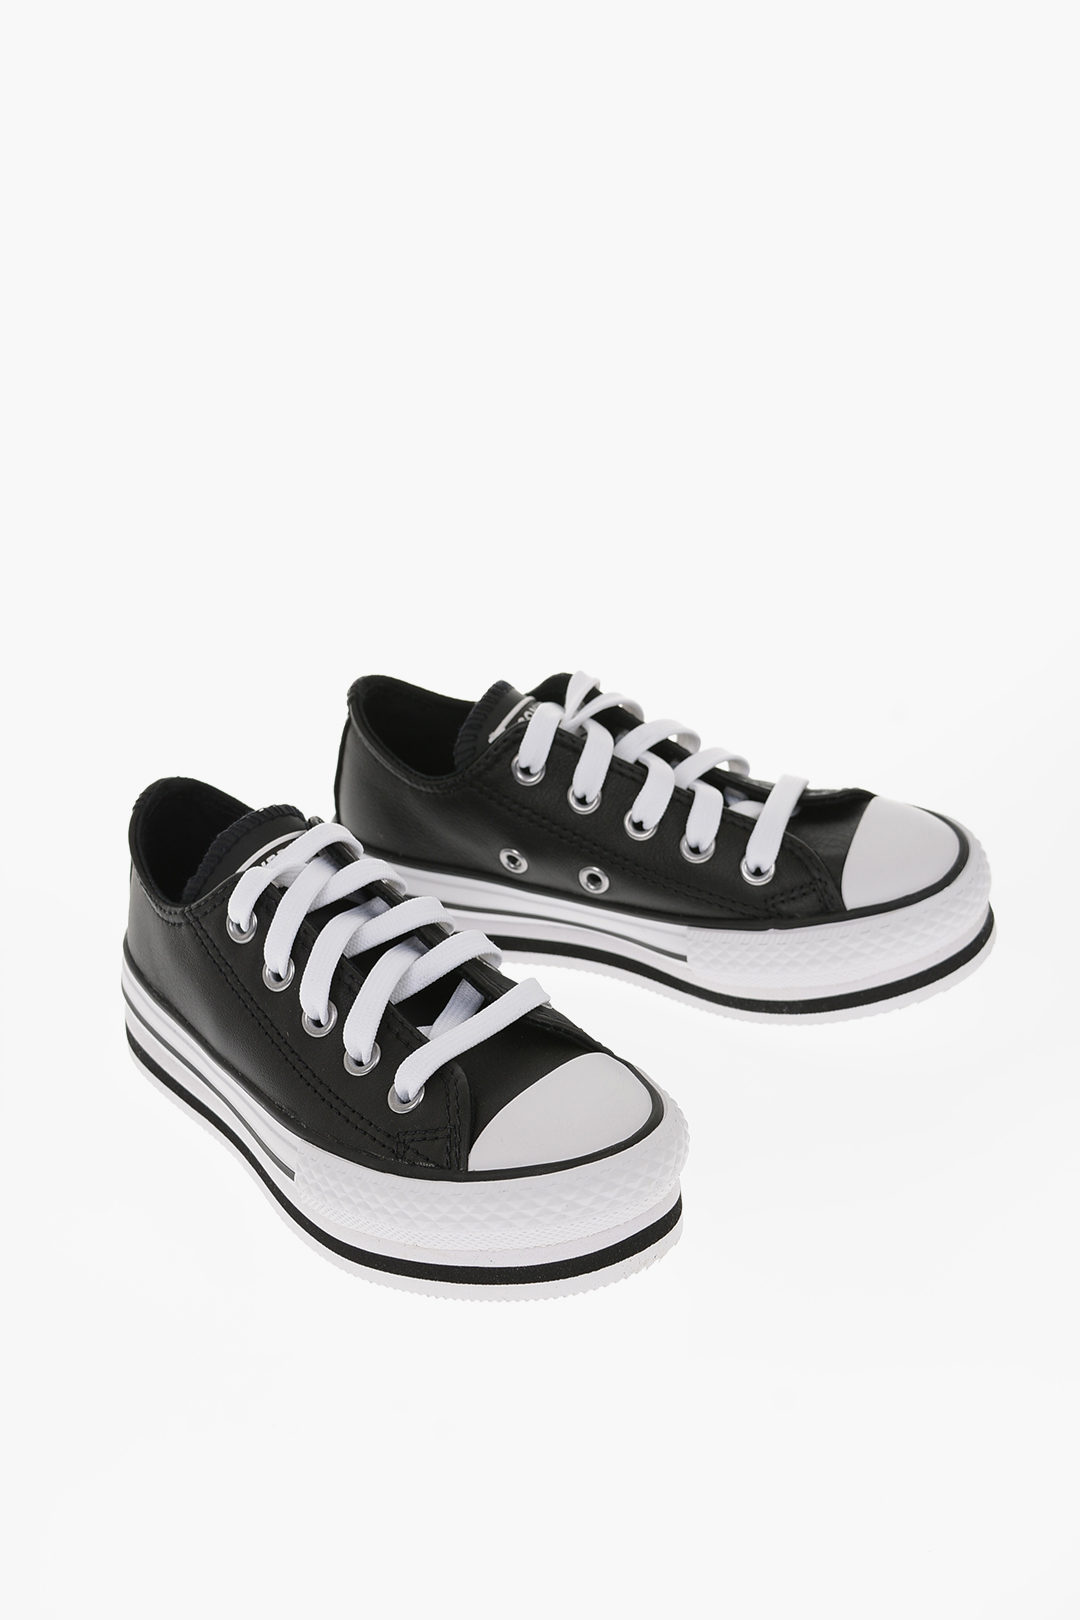 Converse KIDS CHUCK TAYLOR ALL STAR 4cm Leather Platform sneakers unisex children  boys girls - Glamood Outlet